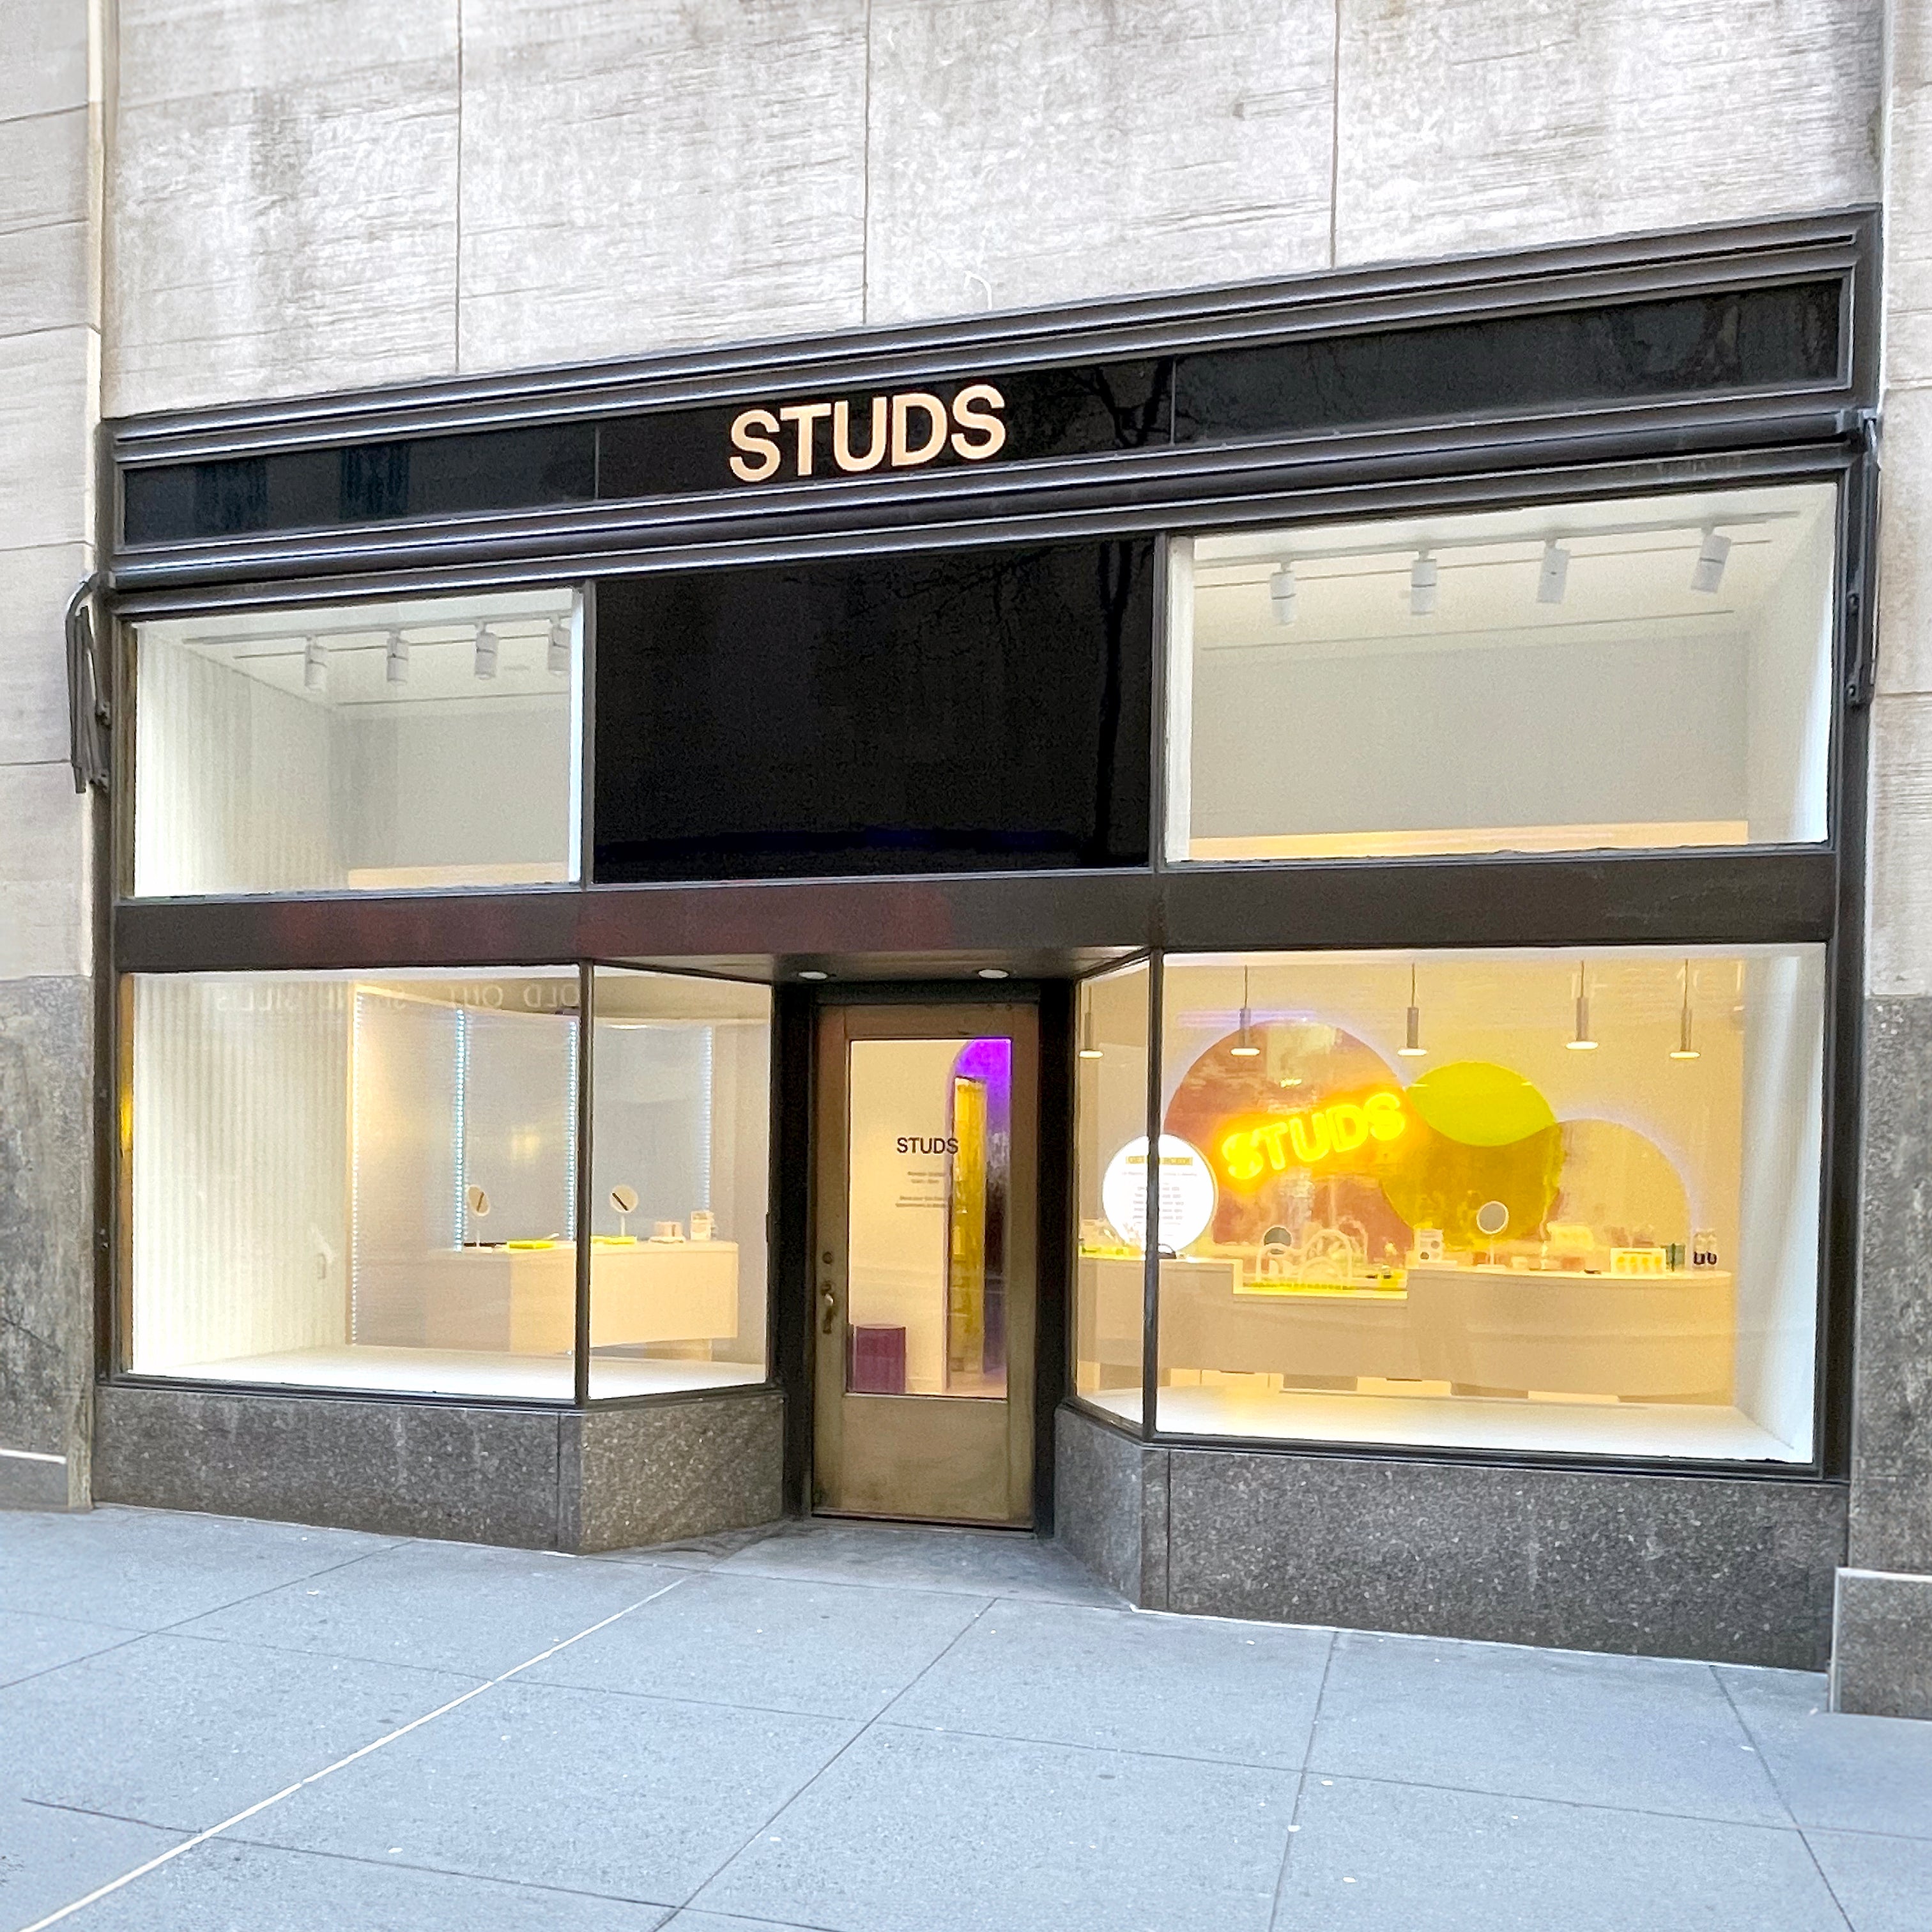 The exterior view of the Studs Williamsburg store.